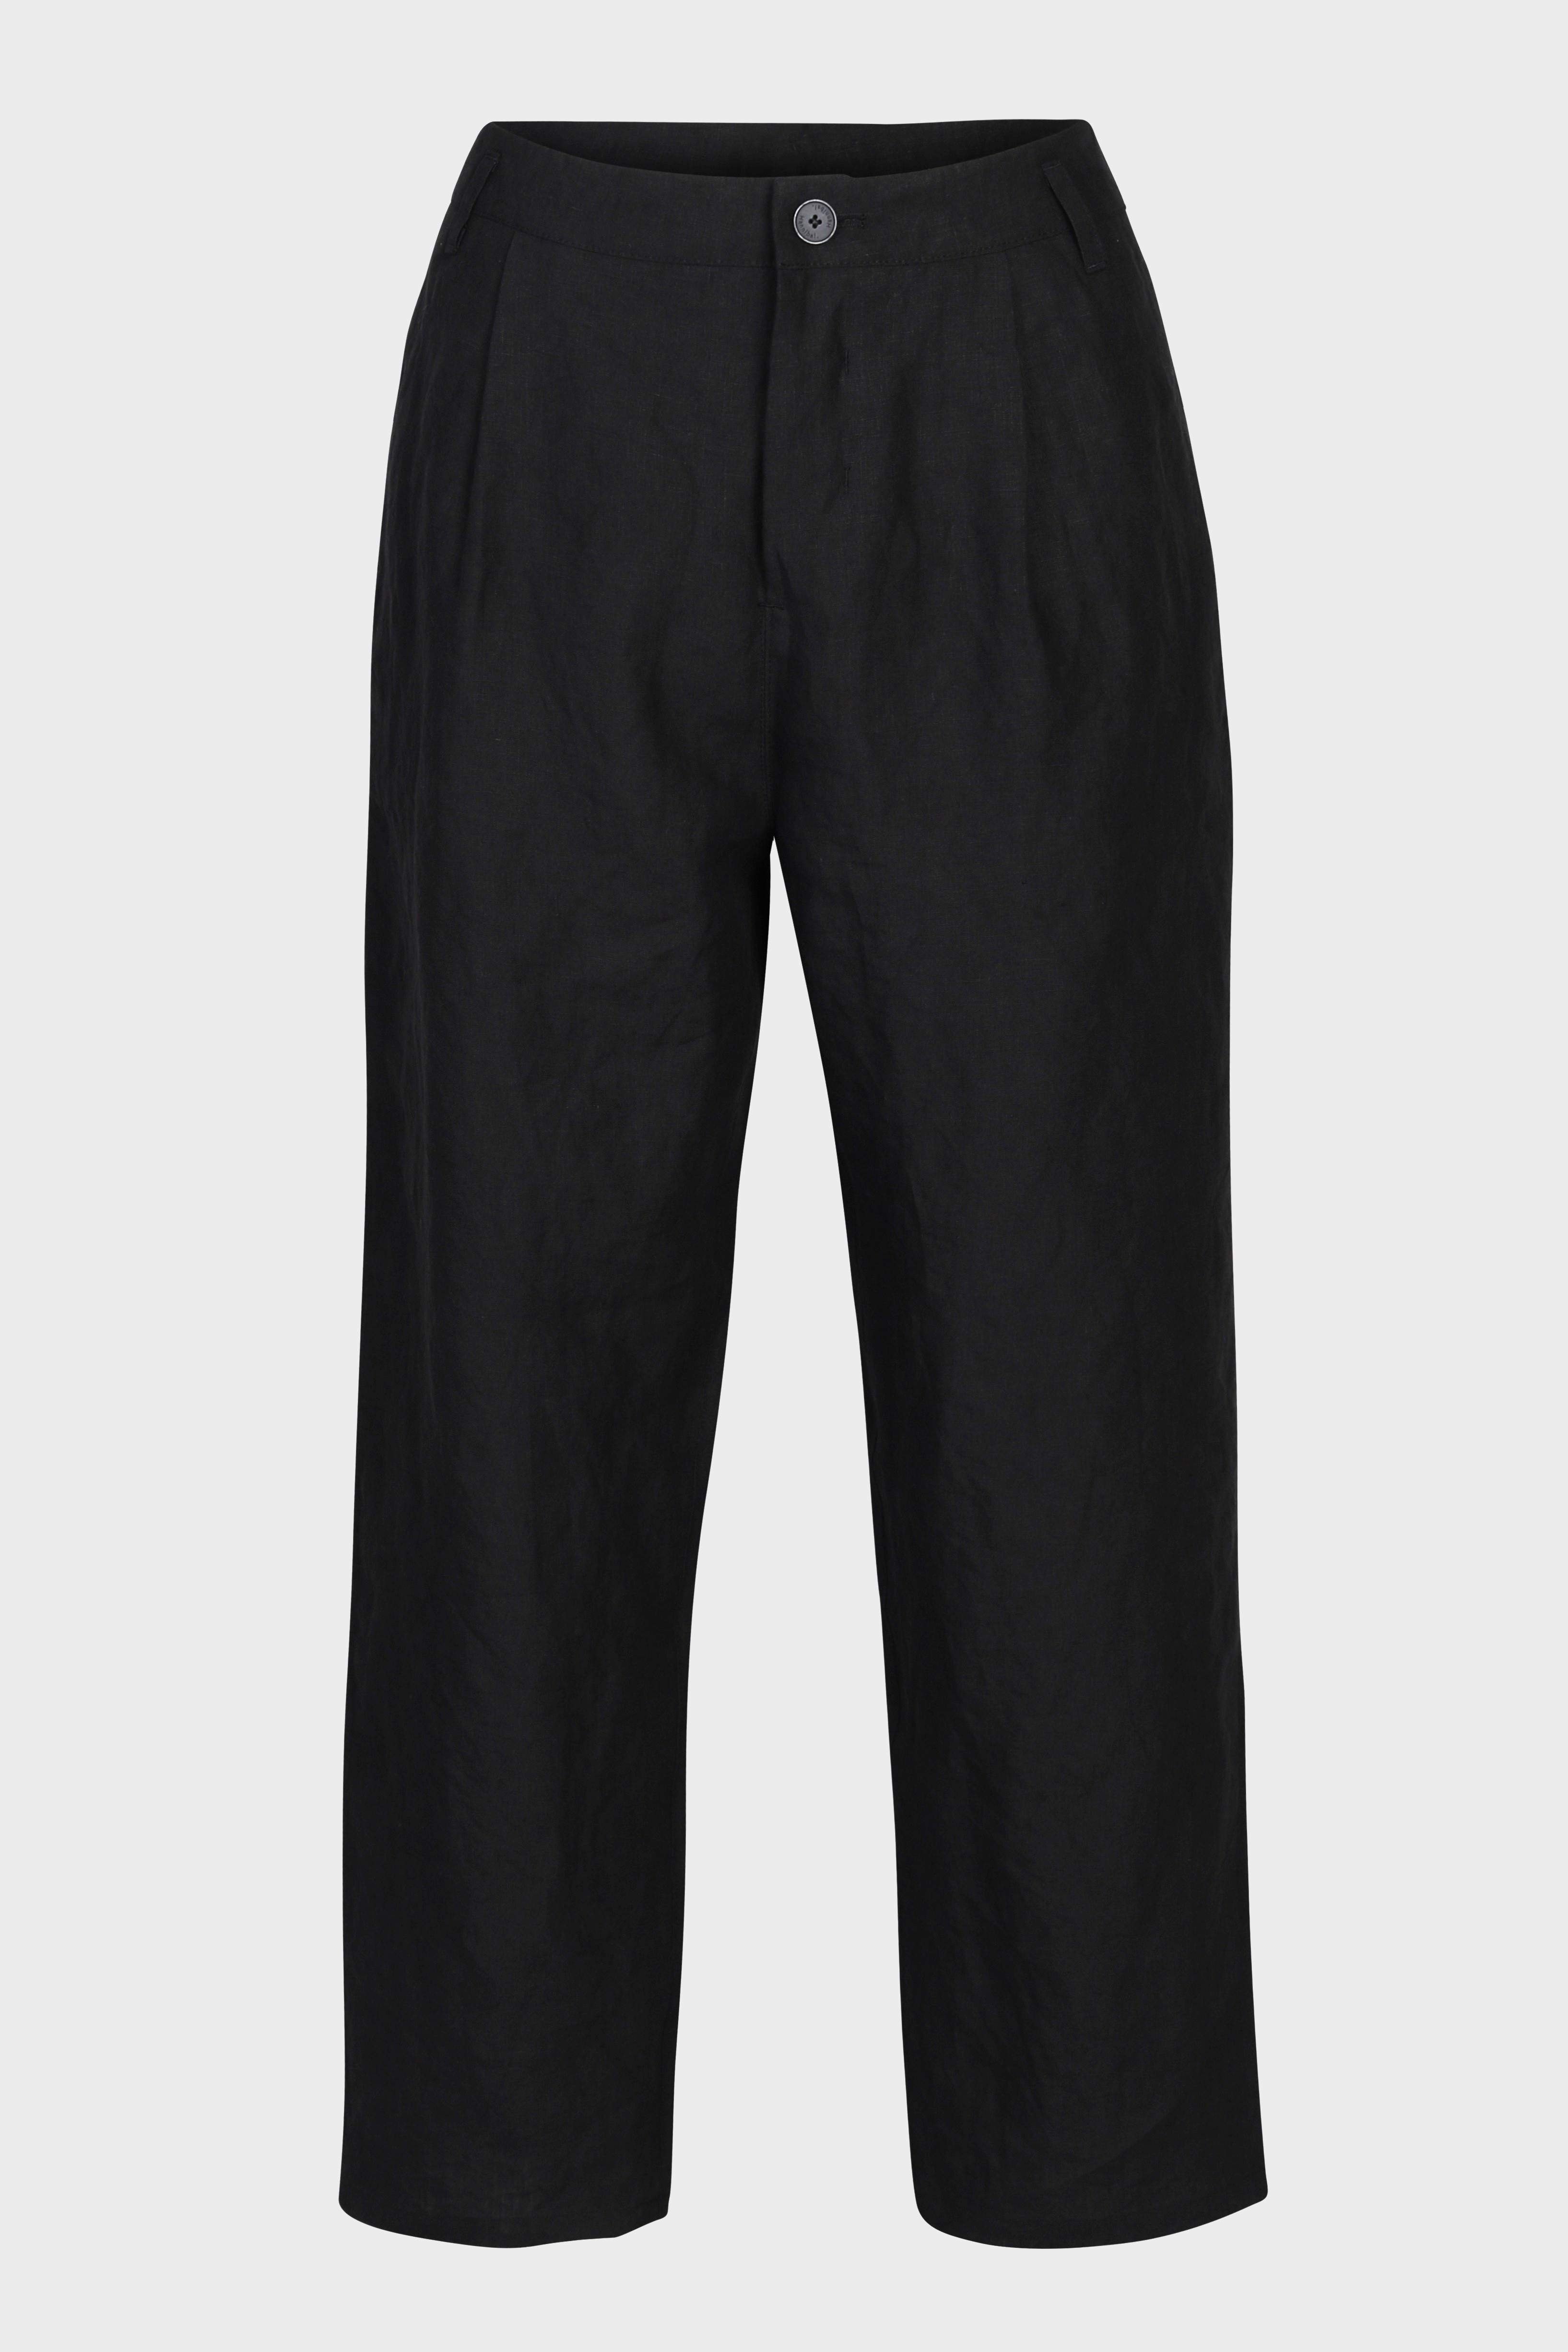 HANNIBAL. Trouser Heli in Washed Black